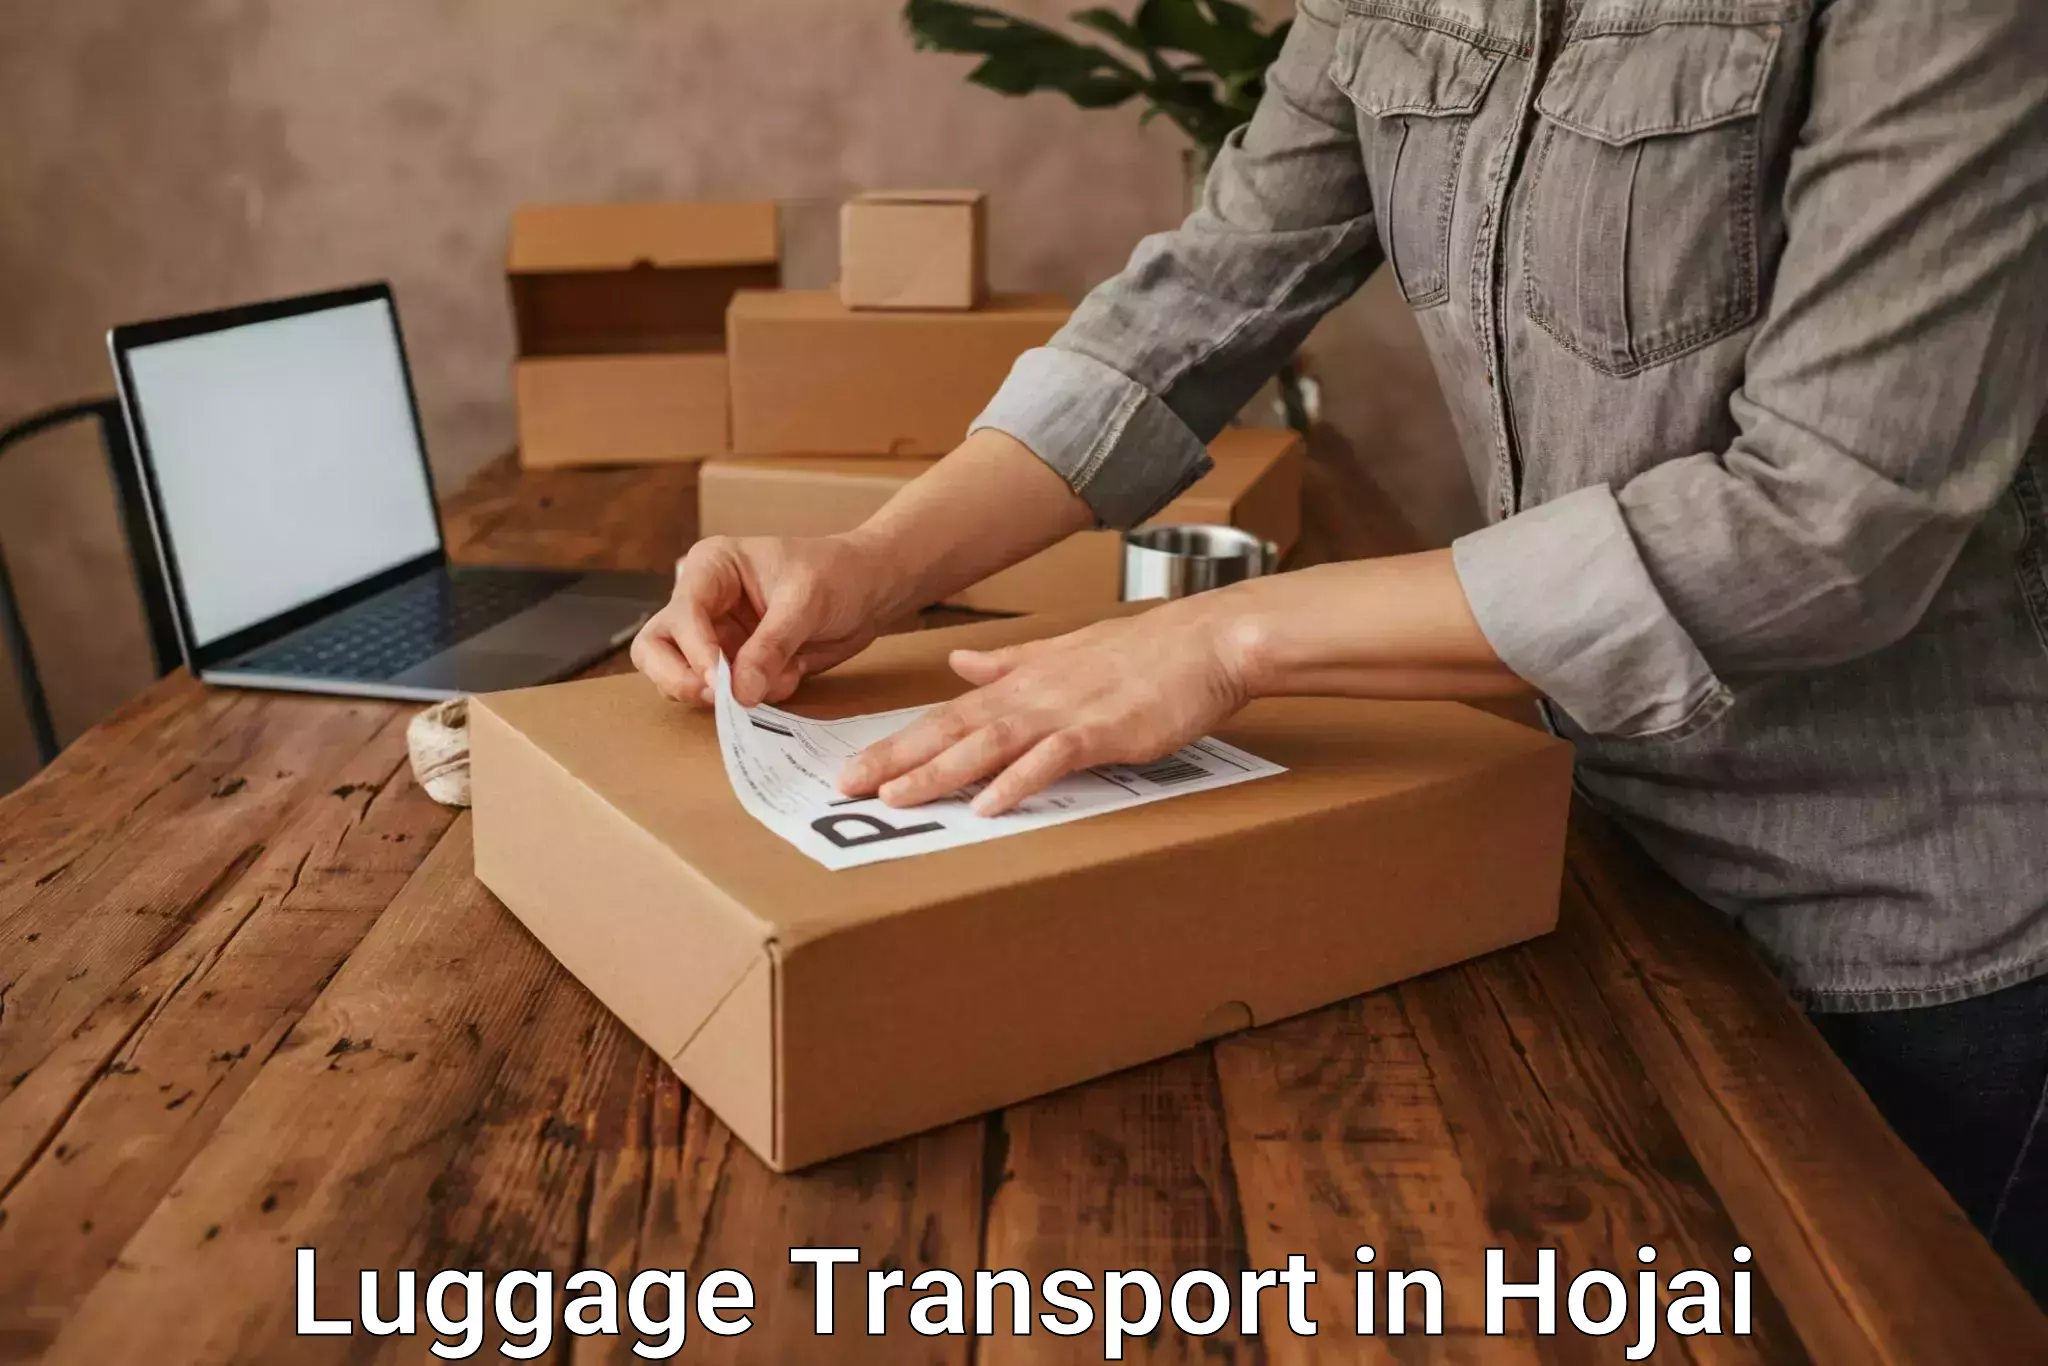 Luggage delivery logistics in Hojai